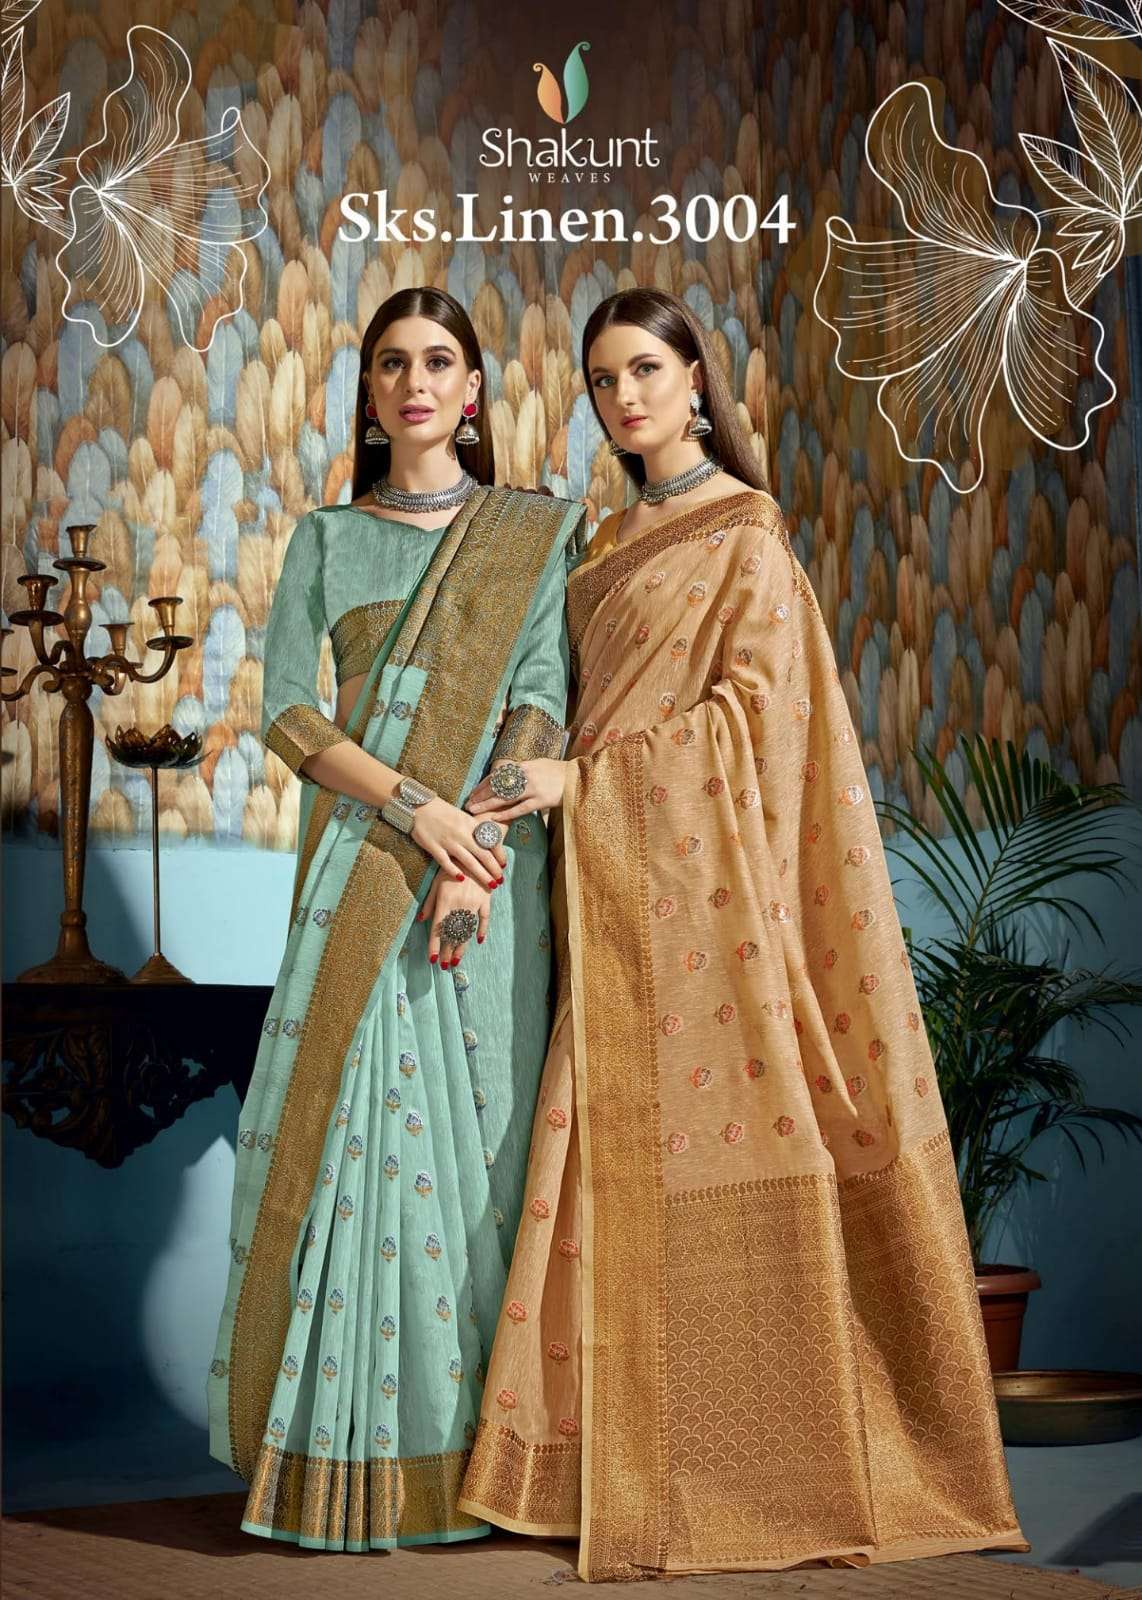 shakunt sks linen 3004 bright color linen woven beautiful sarees collection 